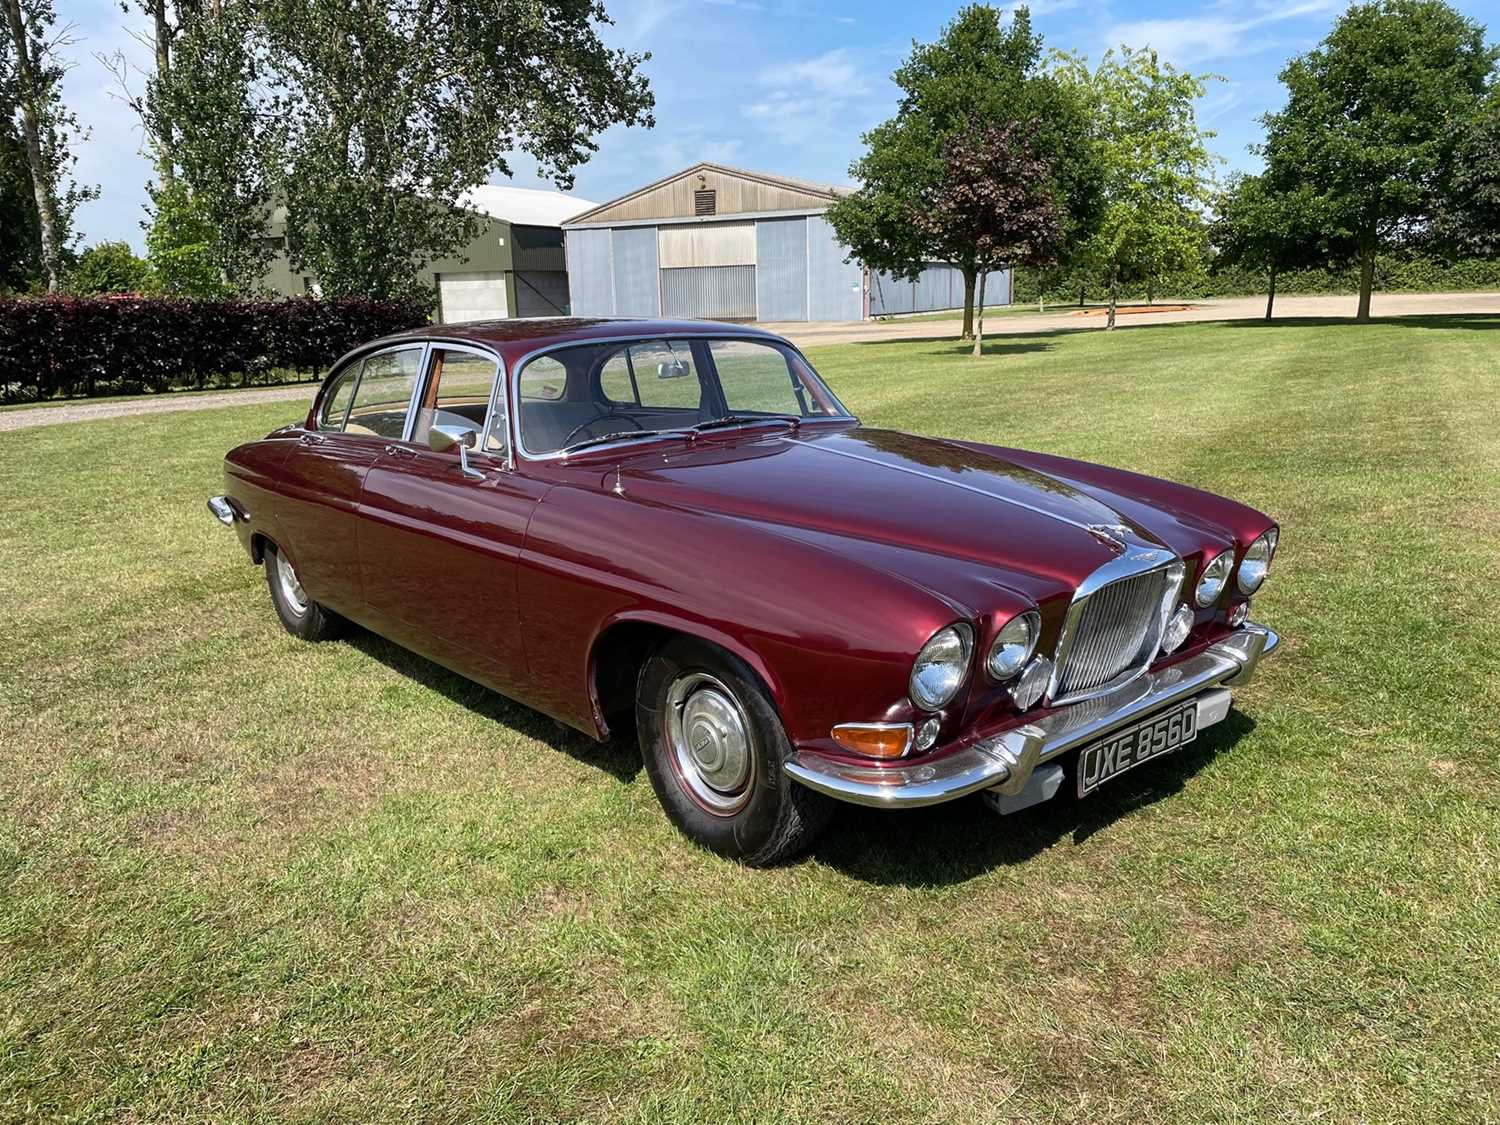 1966 Jaguar MK10 saloon, Reg. No. JXE856D, rare manual transmission with overdrive and believed onl - Image 3 of 27